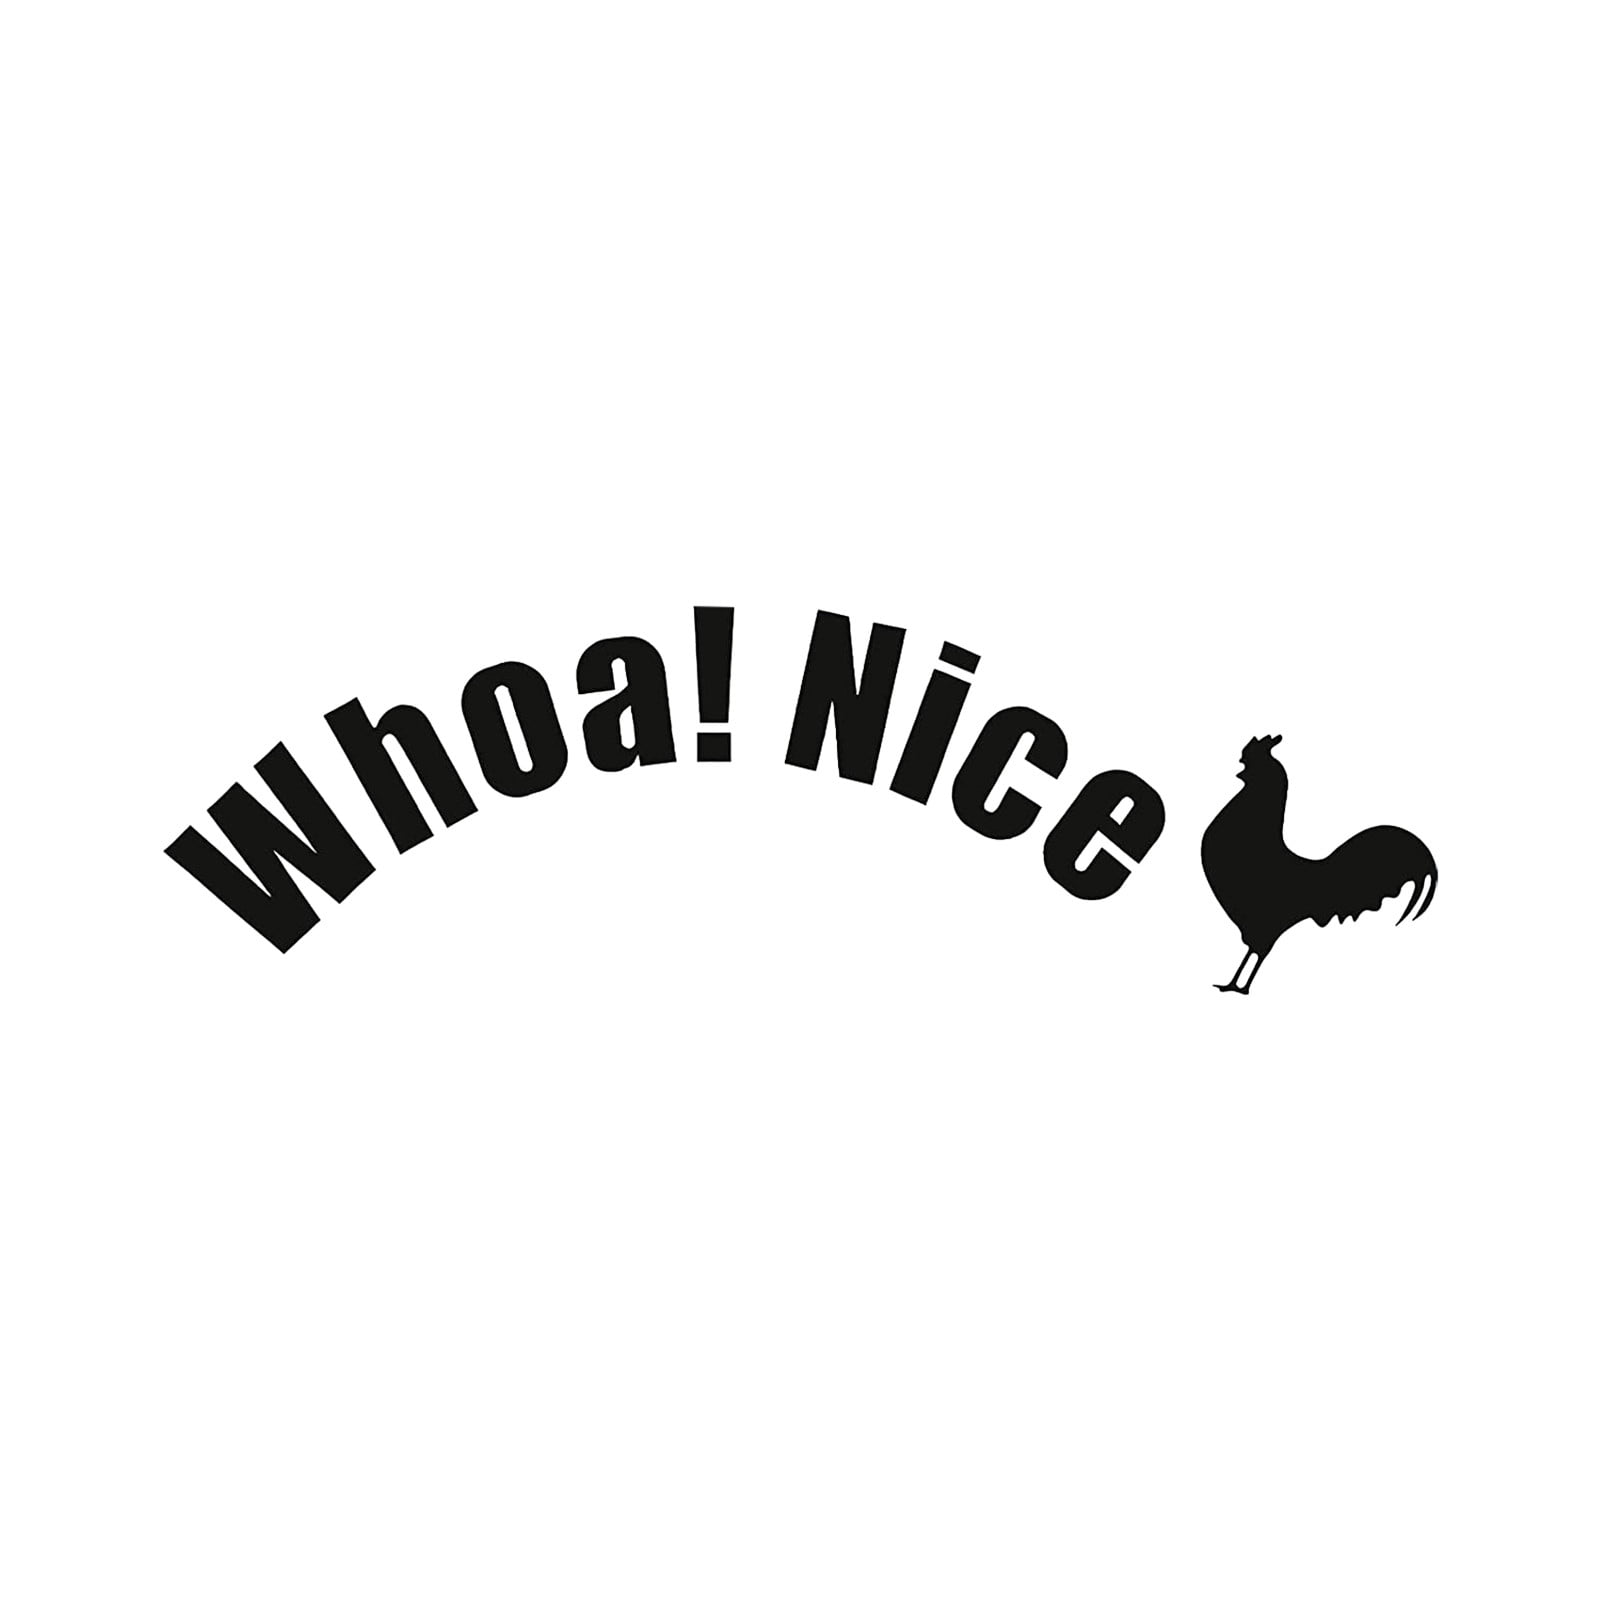 Grevosea 10 Pieces Whoa Nice Rooster Toilet Sticker Toilet Lid Decals Prank Stickers Cock Toilet Sticker Decal Funny Stickers Waterproof Sturdy Material for Adults Men Women 